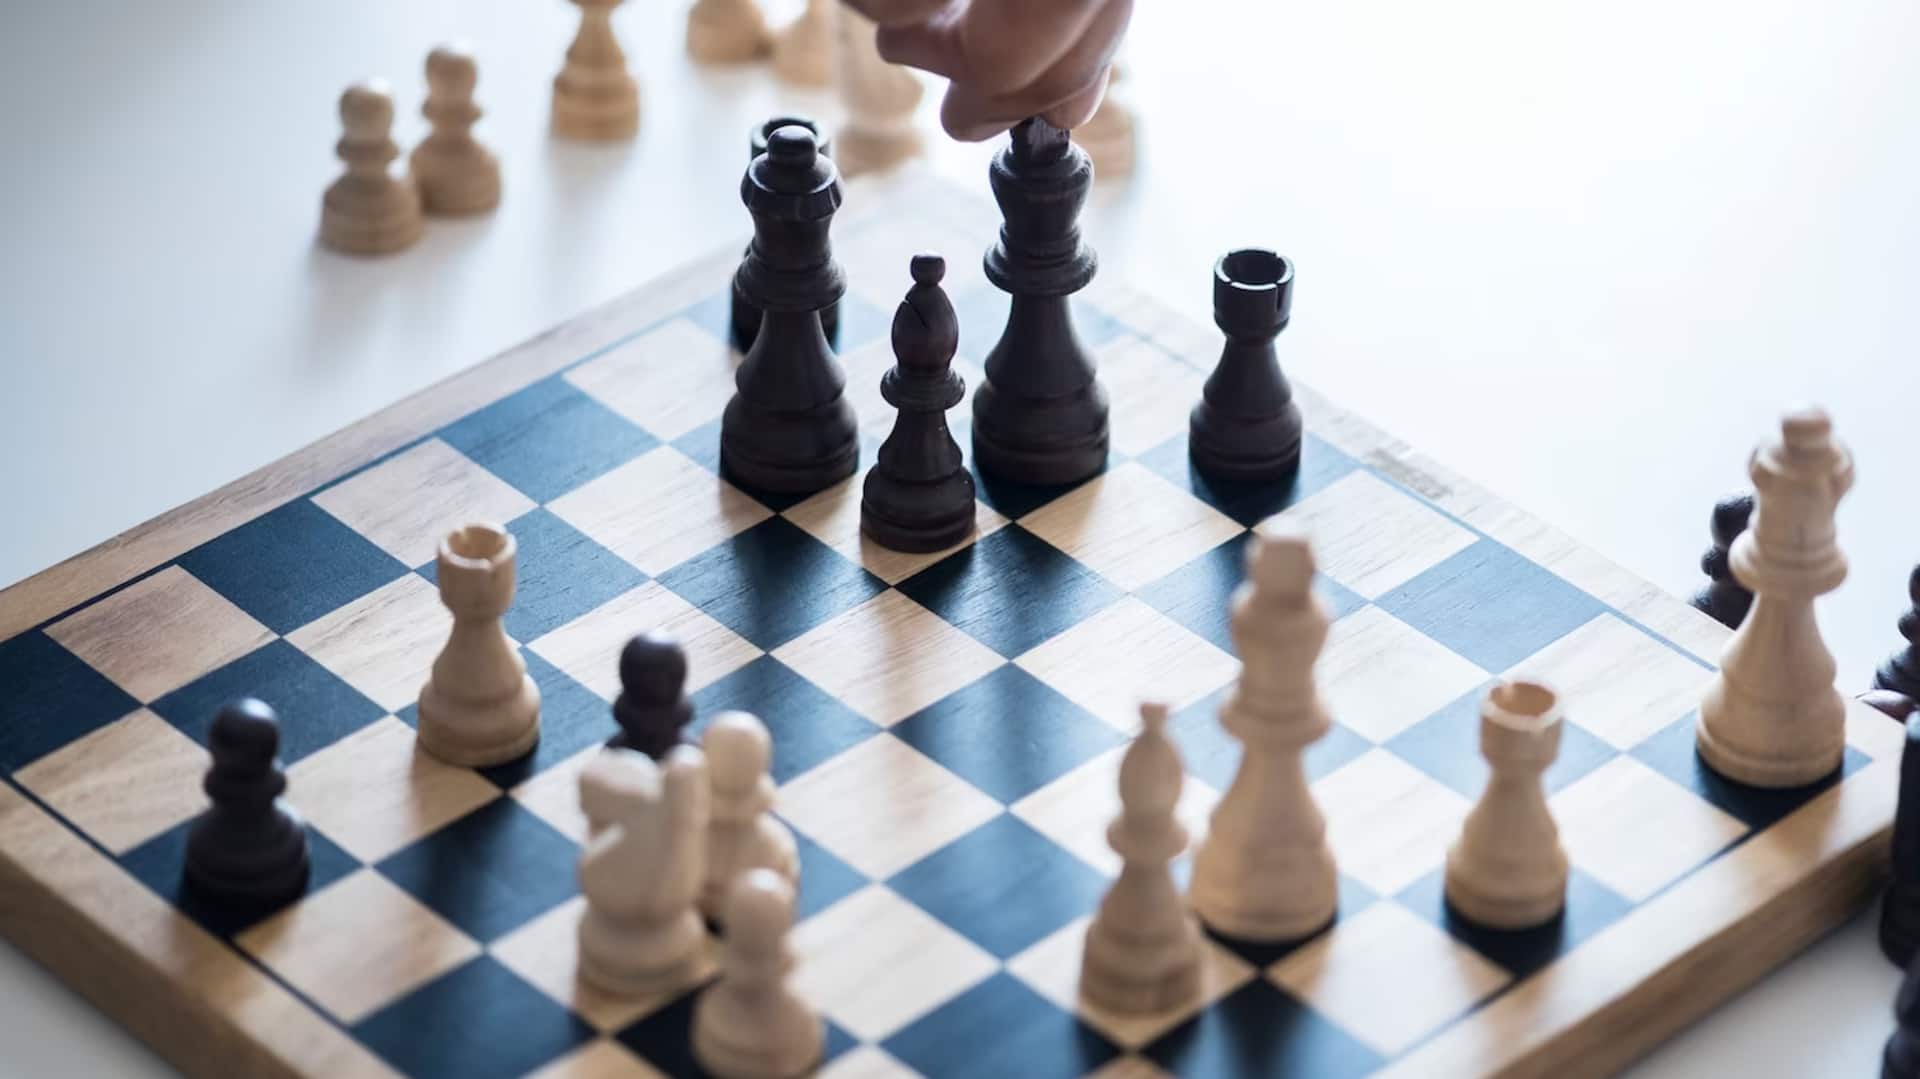 When playing chess, your brain will be challenged to exercise logic,  develop pattern recognition, and make decisions both visually and…